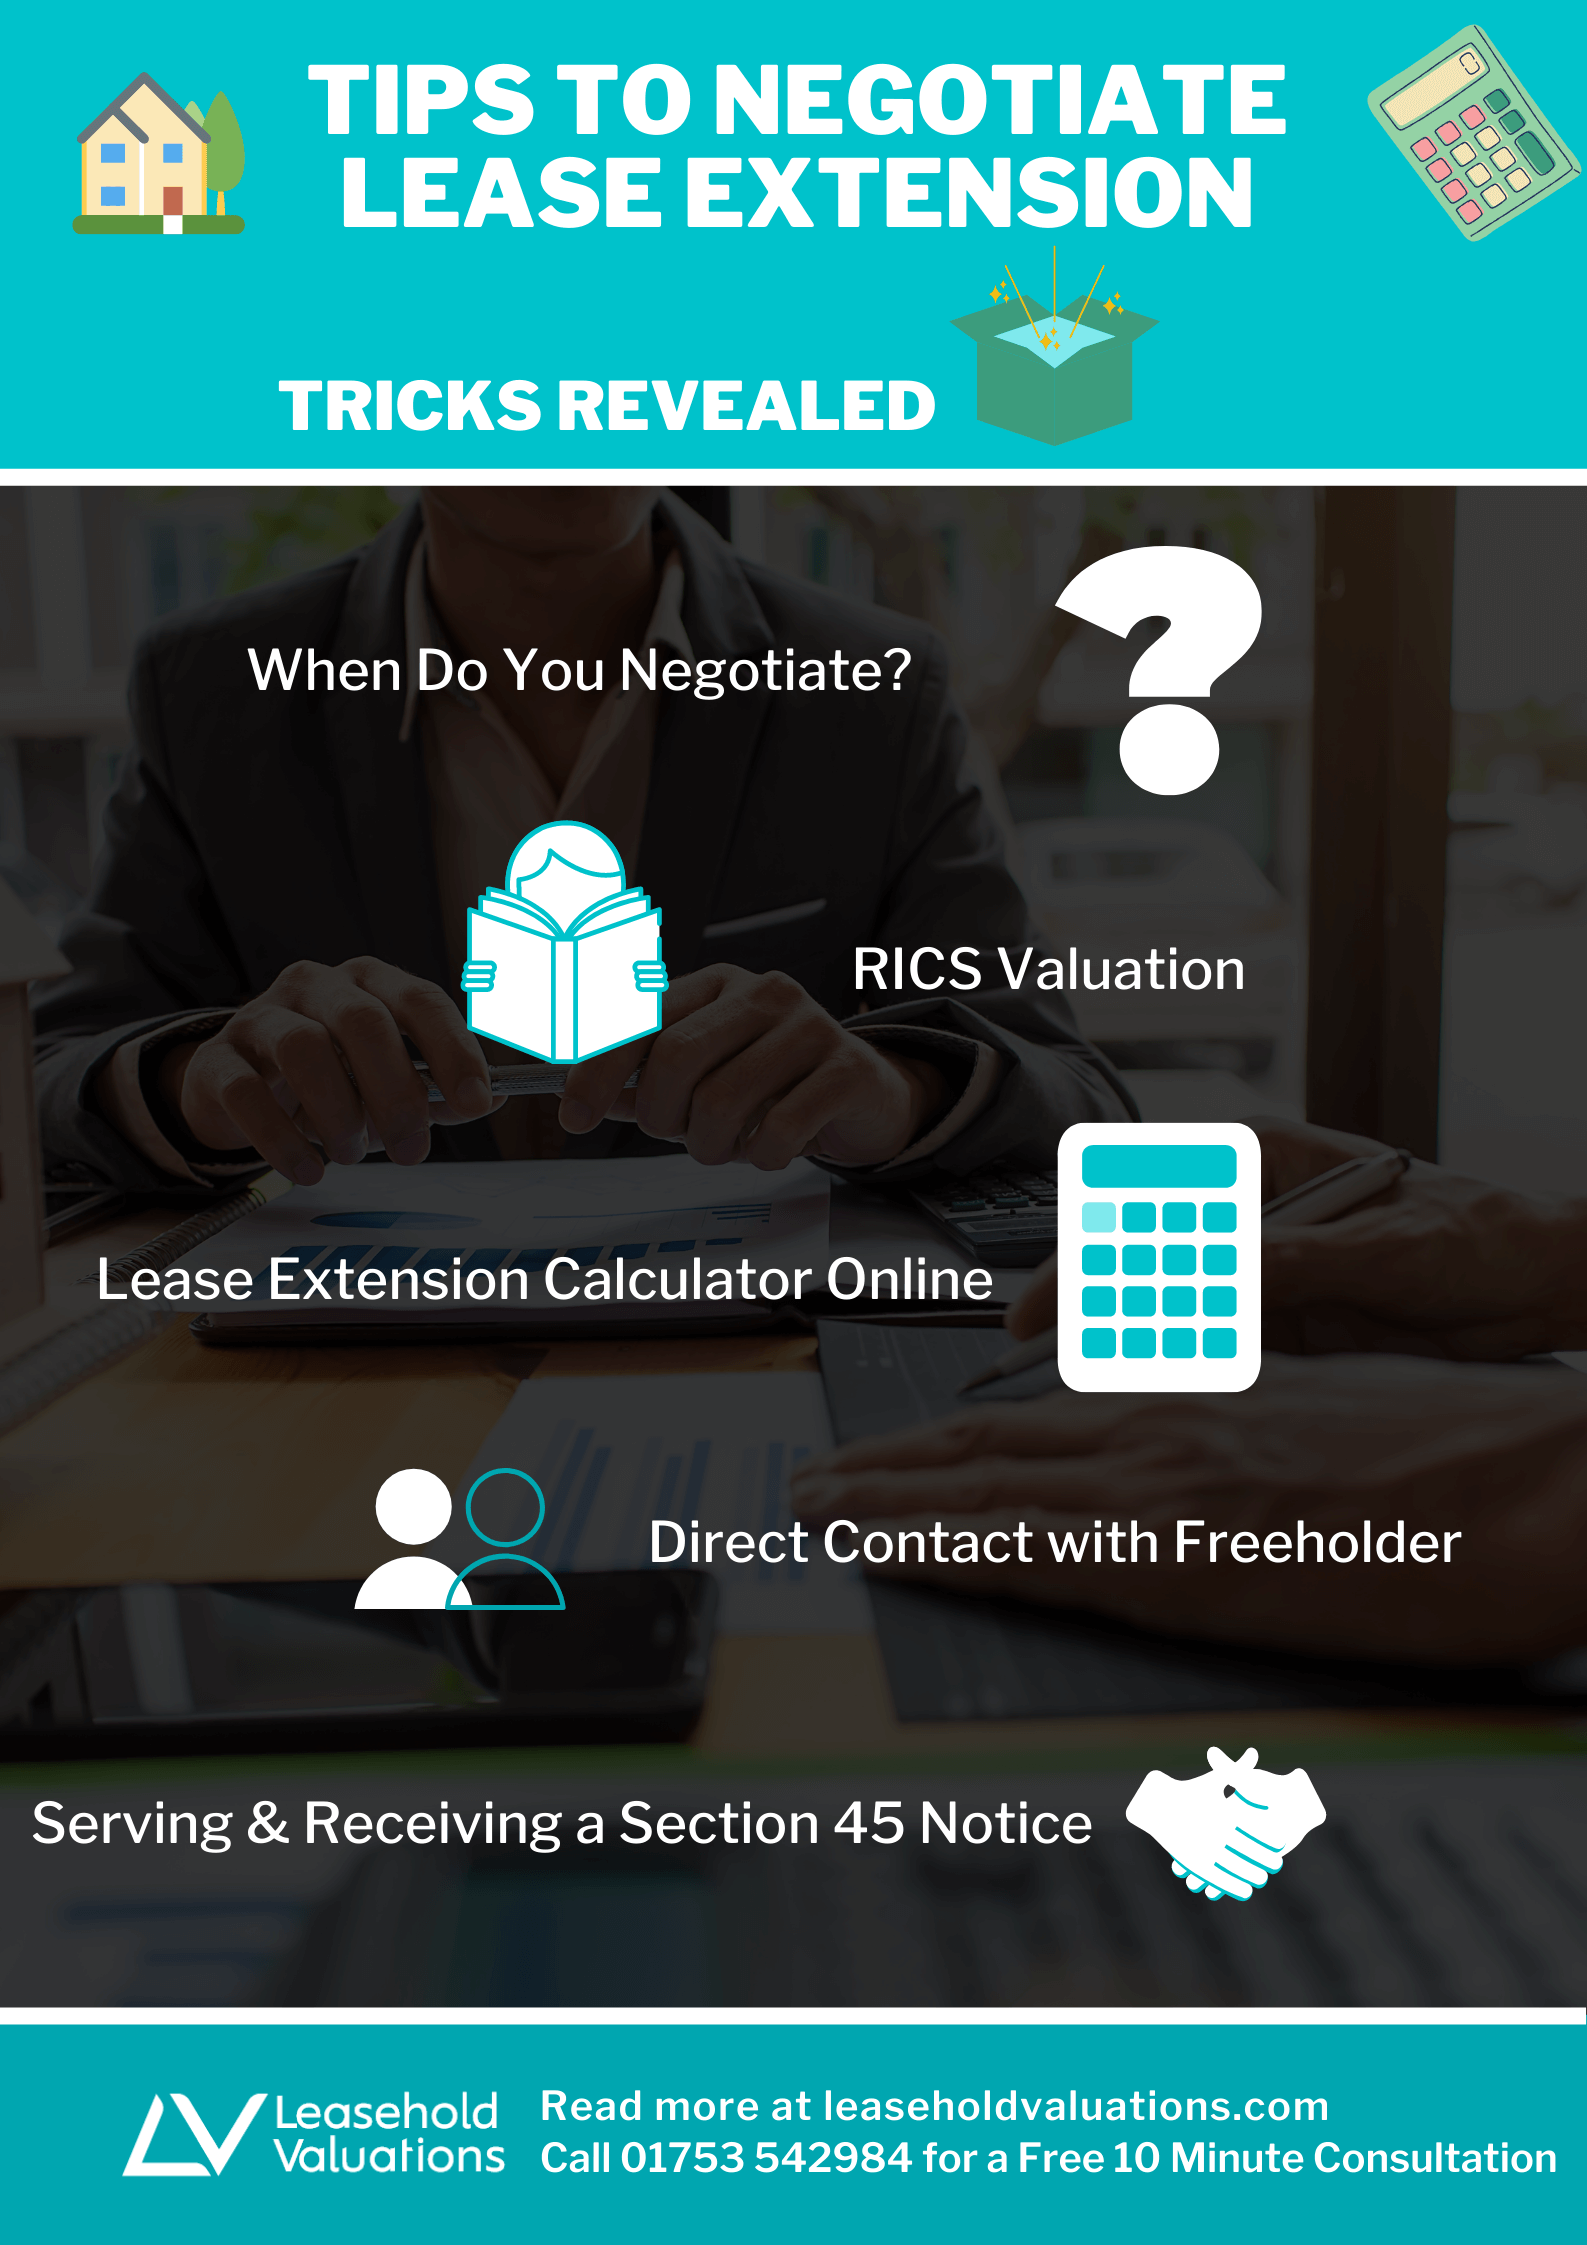 How To Negotiate Lease Extension | Trick Revealed